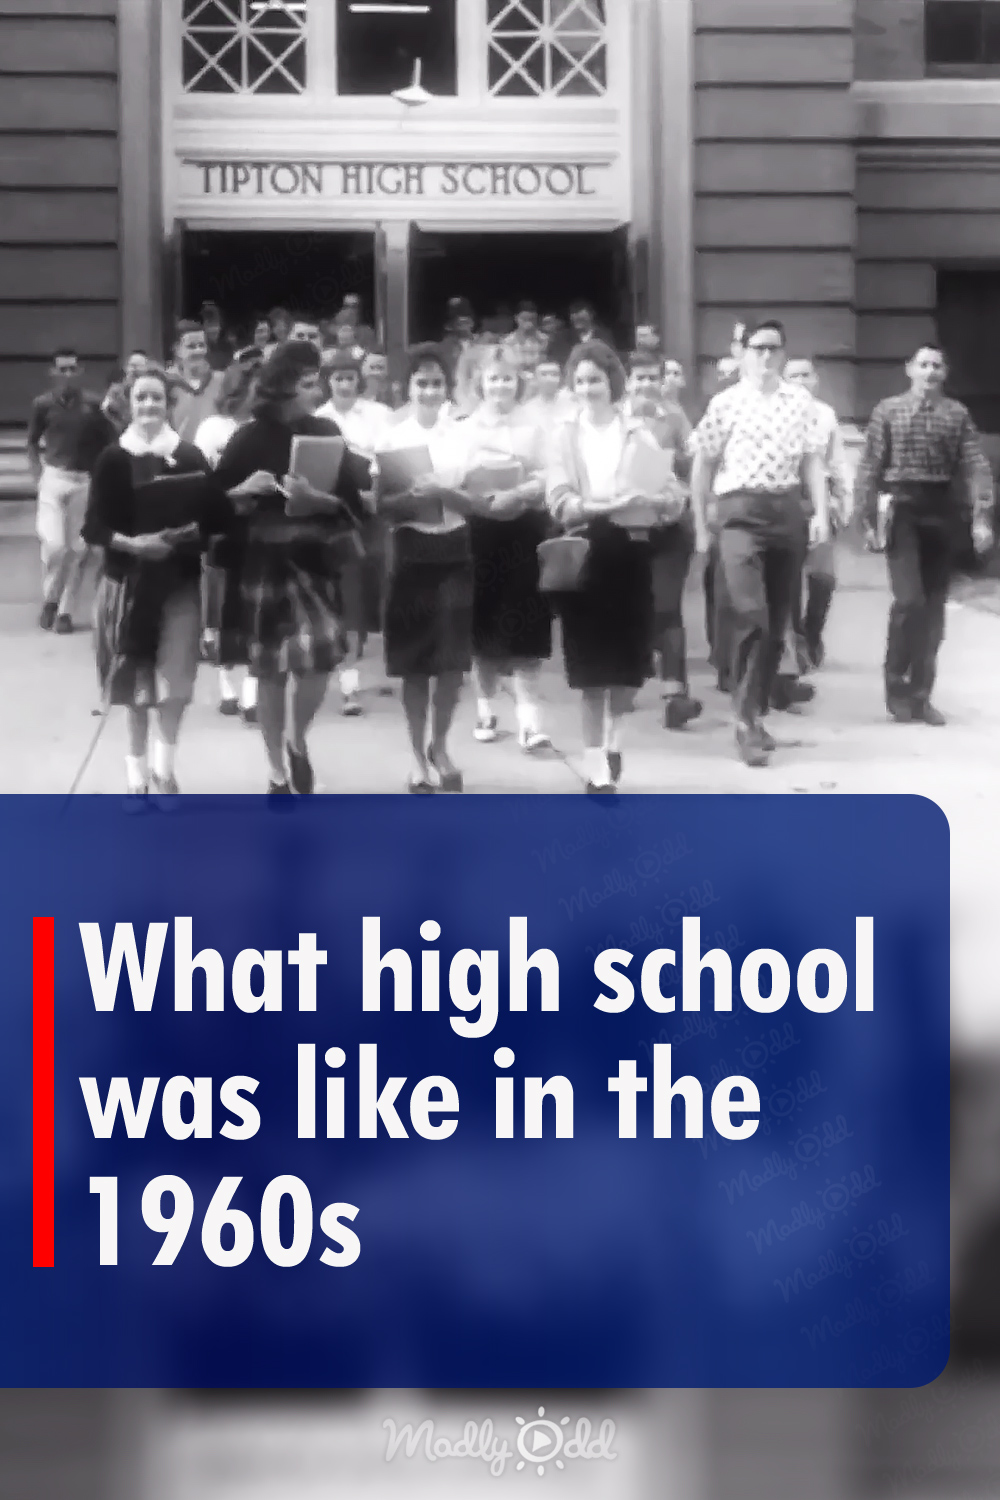 What high school was like in the 1960s